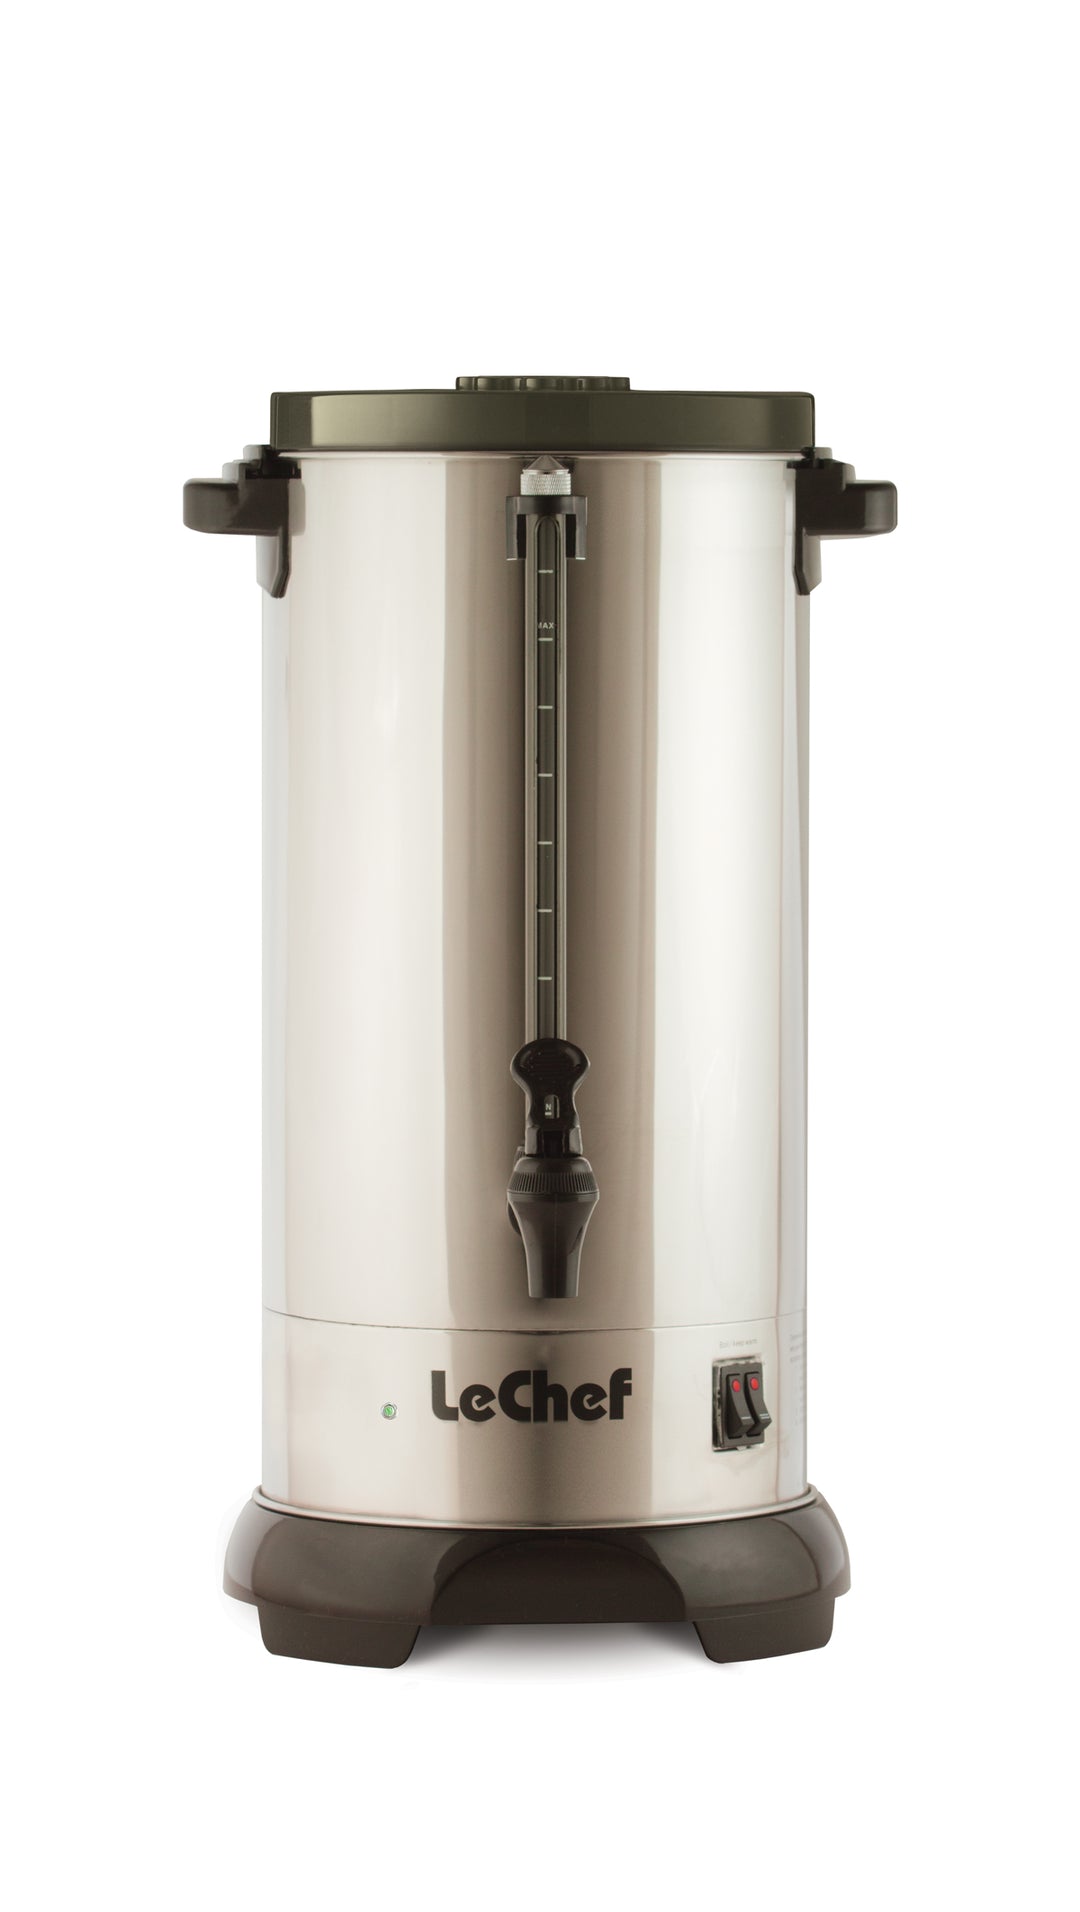 Using a Hot Water Urn on Shabbos